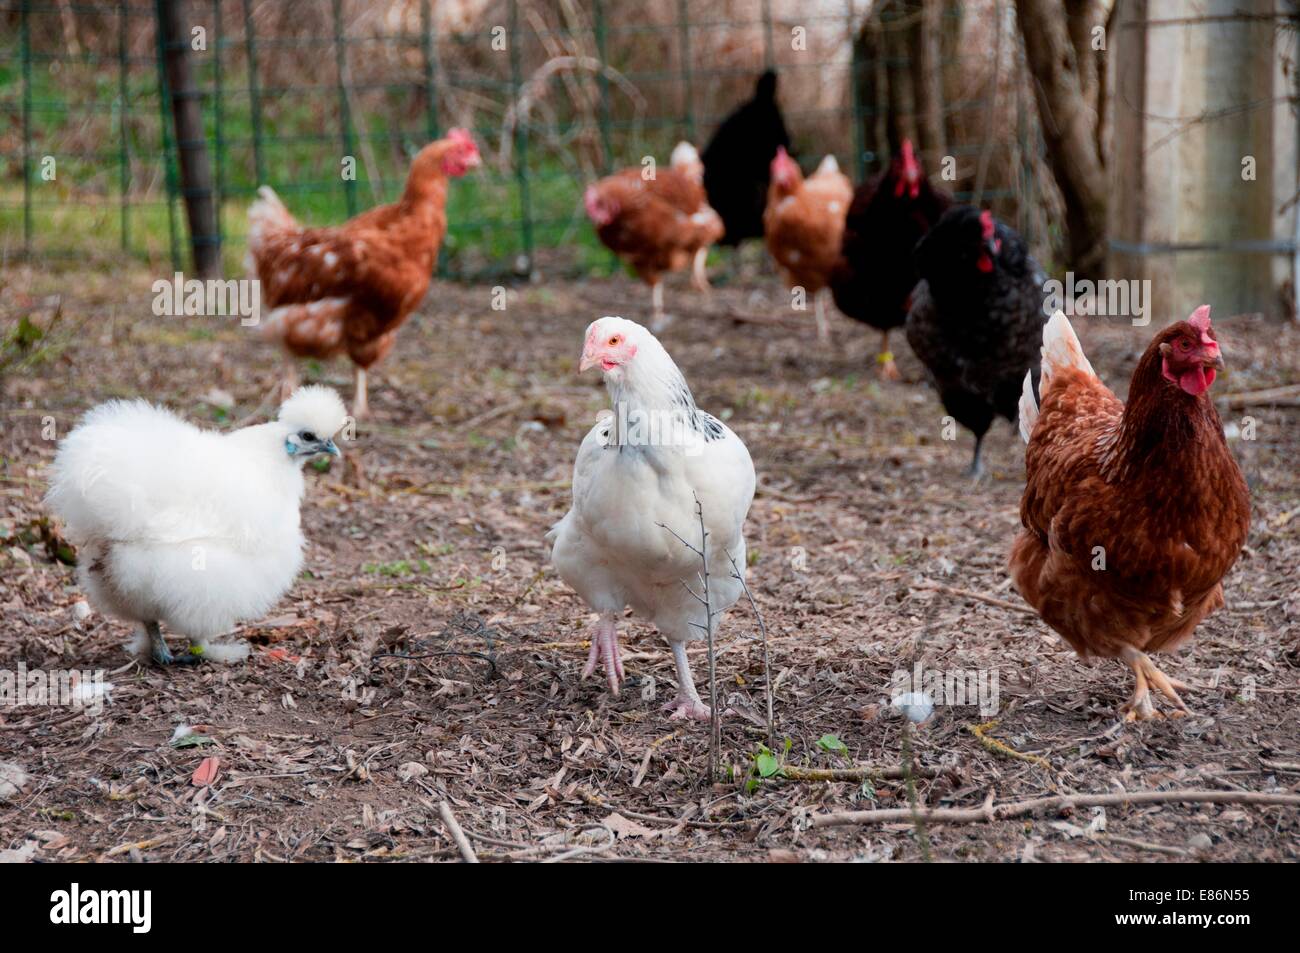 Chickens on a farm Stock Photo